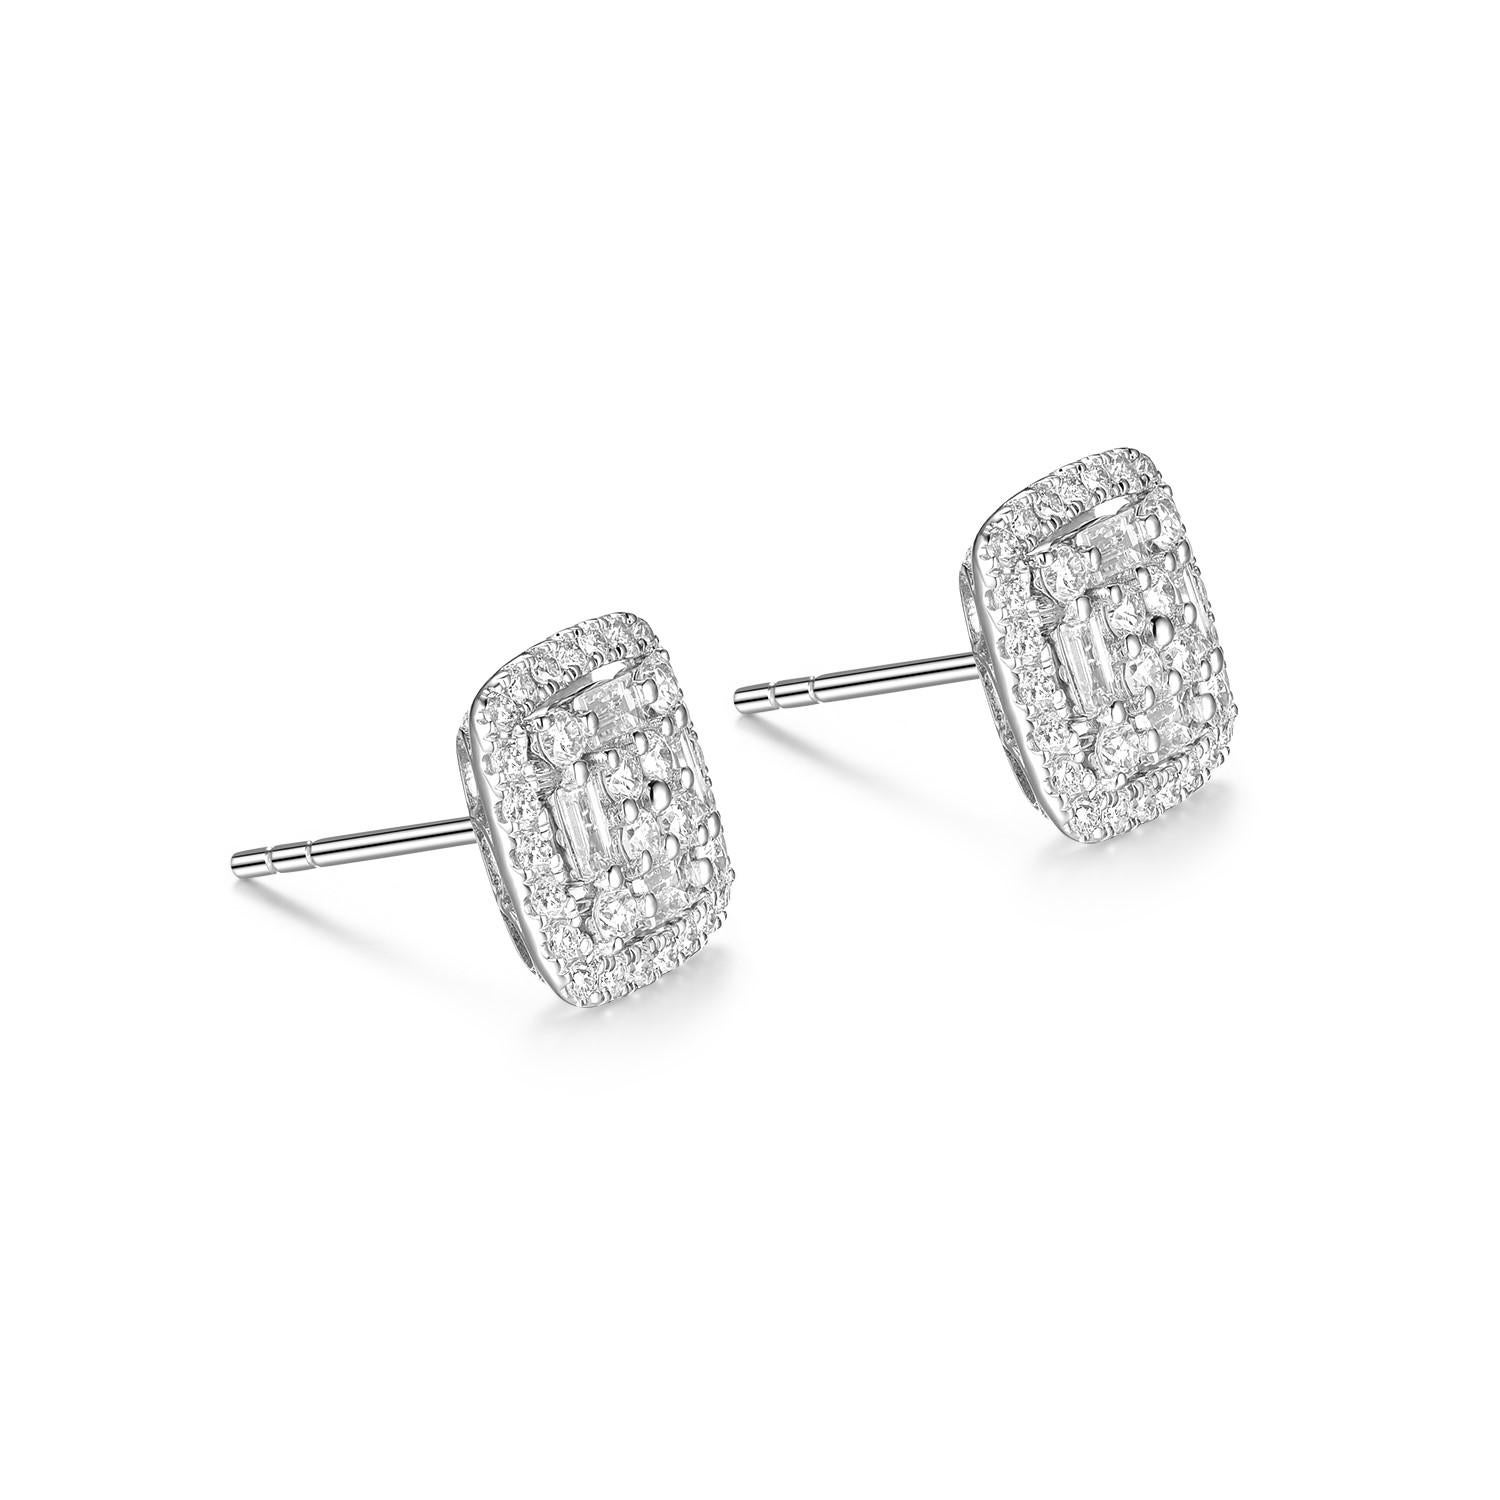 This diamond earrings feature 0.31 carat of taper baguette diamond, assented with 0.63 carat of round diamonds. Earrings are set in 18 karat white gold.
Diamonds grading are F Color VS Quality

Taper Baguette Diamond 0.31 carat
Round Diamond 0.63